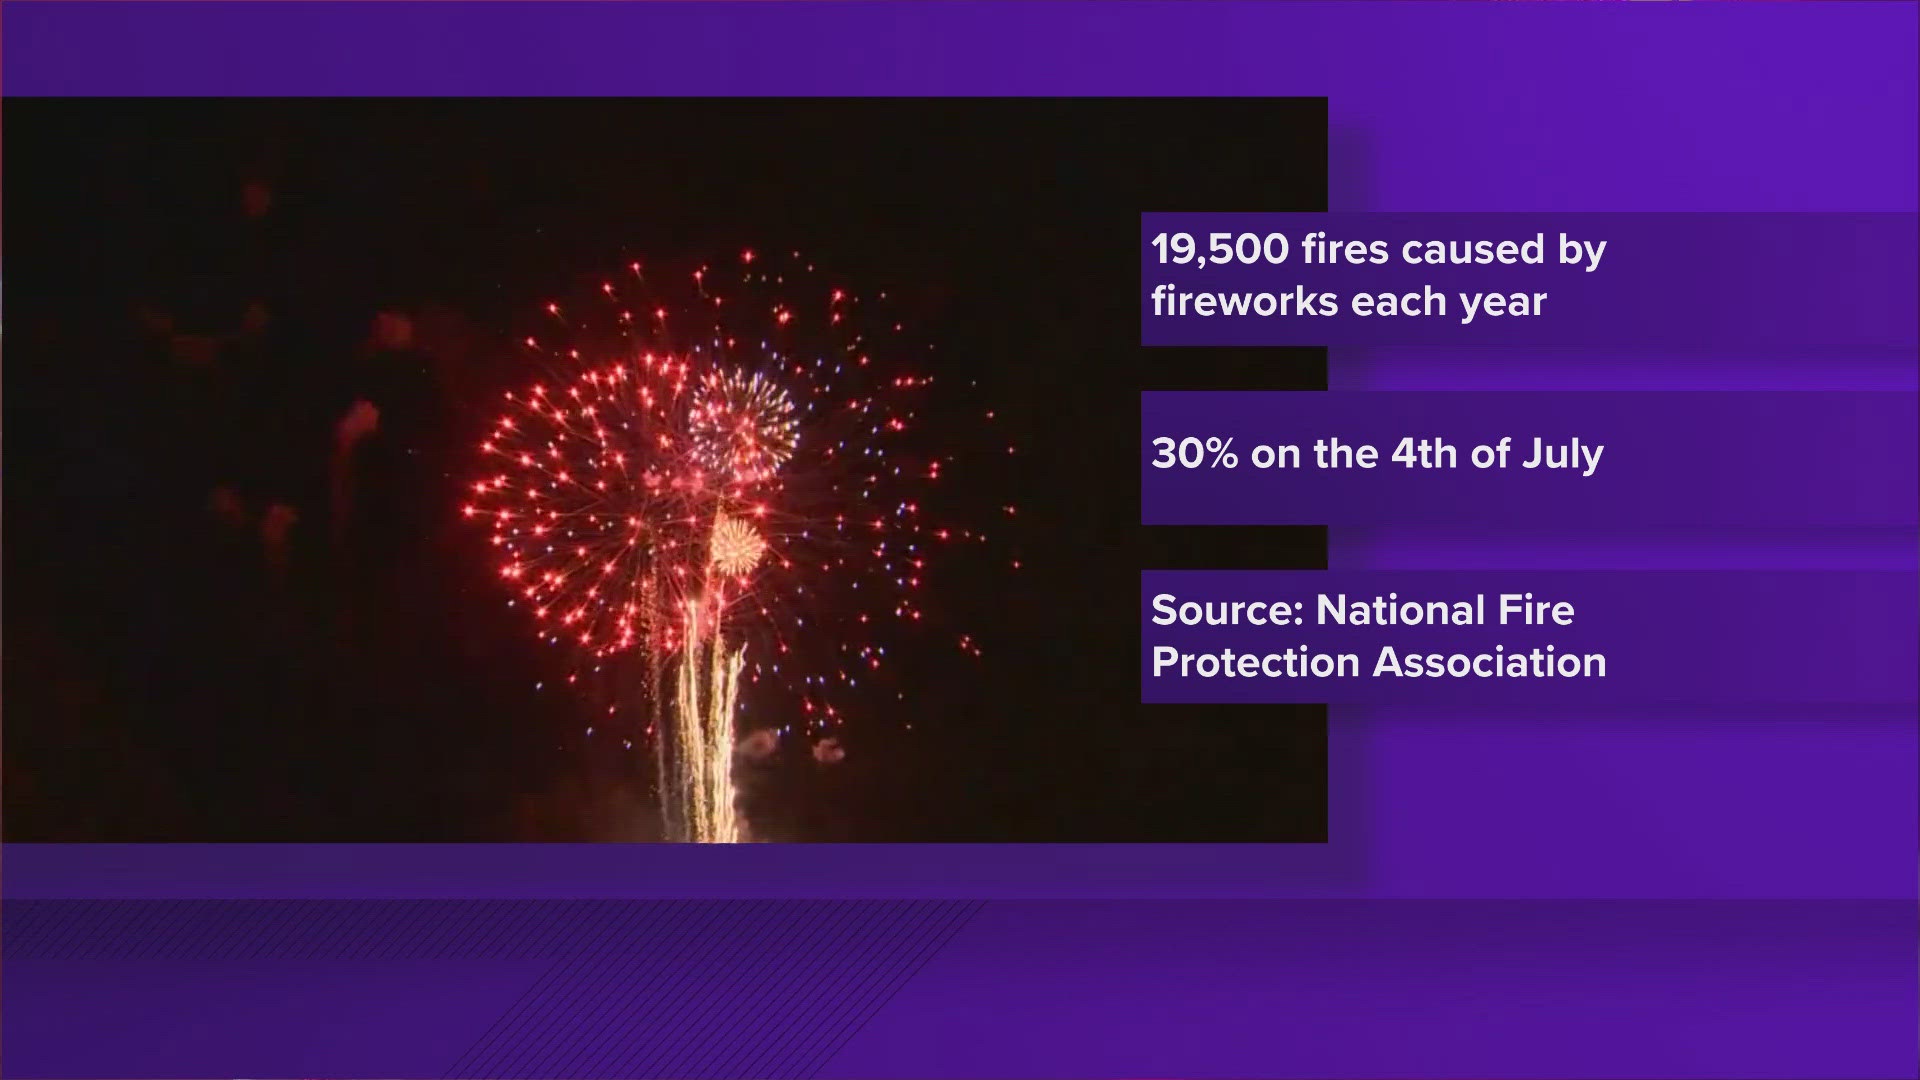 Aurora Denver Colorado fire chief lifts ban on fireworks from June 15 to July 4 after the metrics used to assess fire risk "exceed thresholds requiring a fire ban."